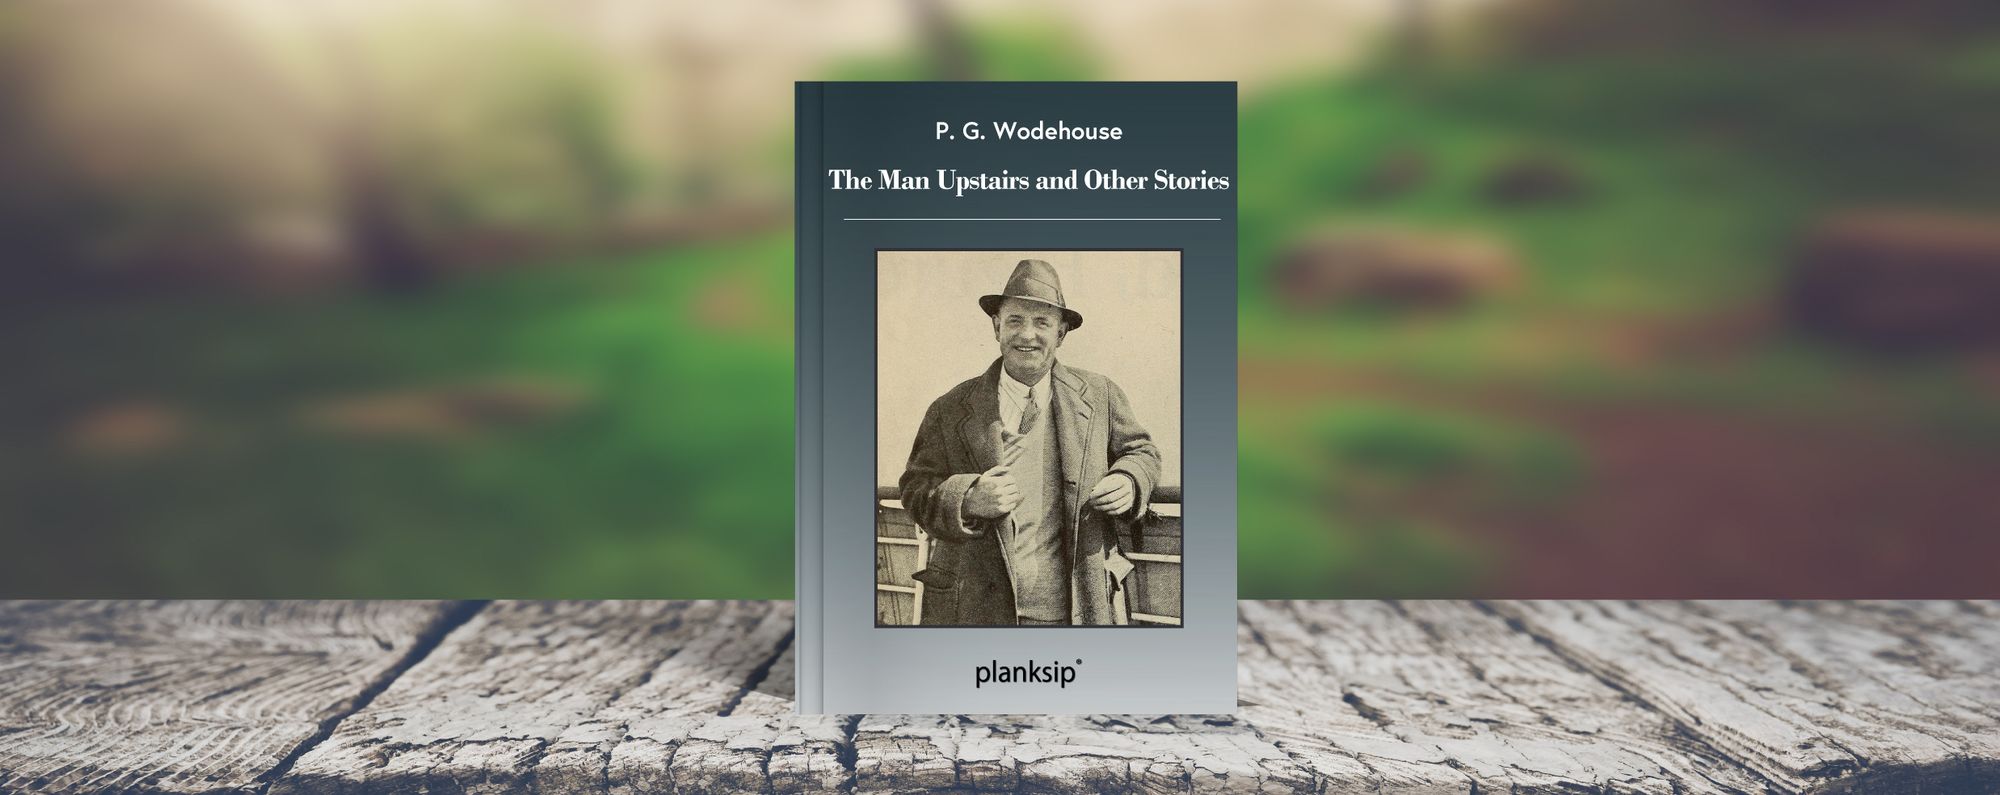 The Man Upstairs and Other Stories by P. G. Wodehouse